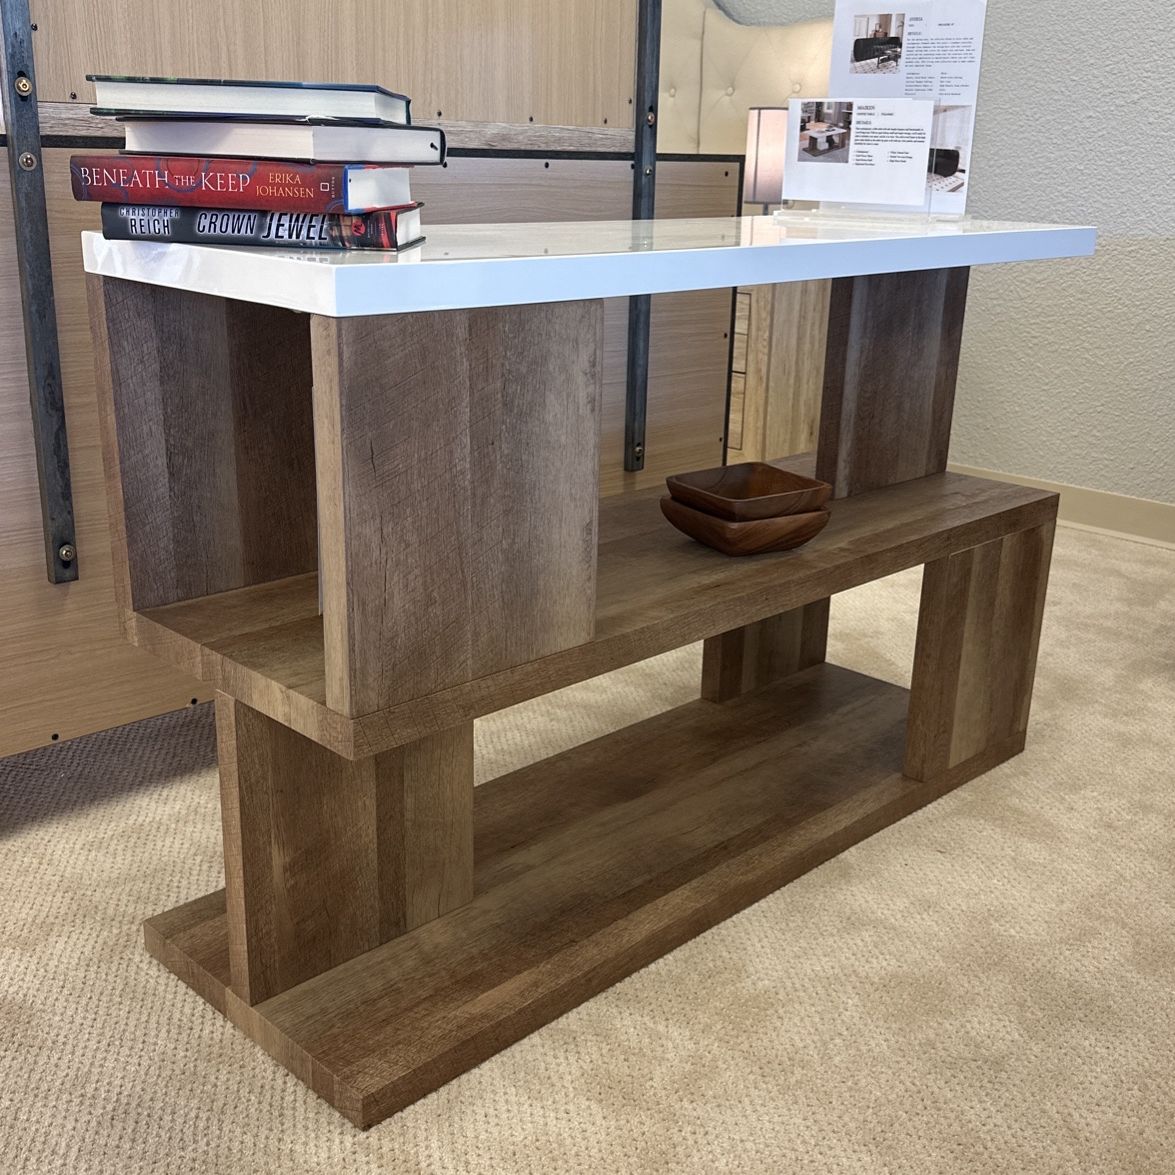 ✅Sofa Table Tv contemporary Console Table Ample Storage, Solid, Wood, Two-Tone Design, High Gloss Lacquer (In Store Item